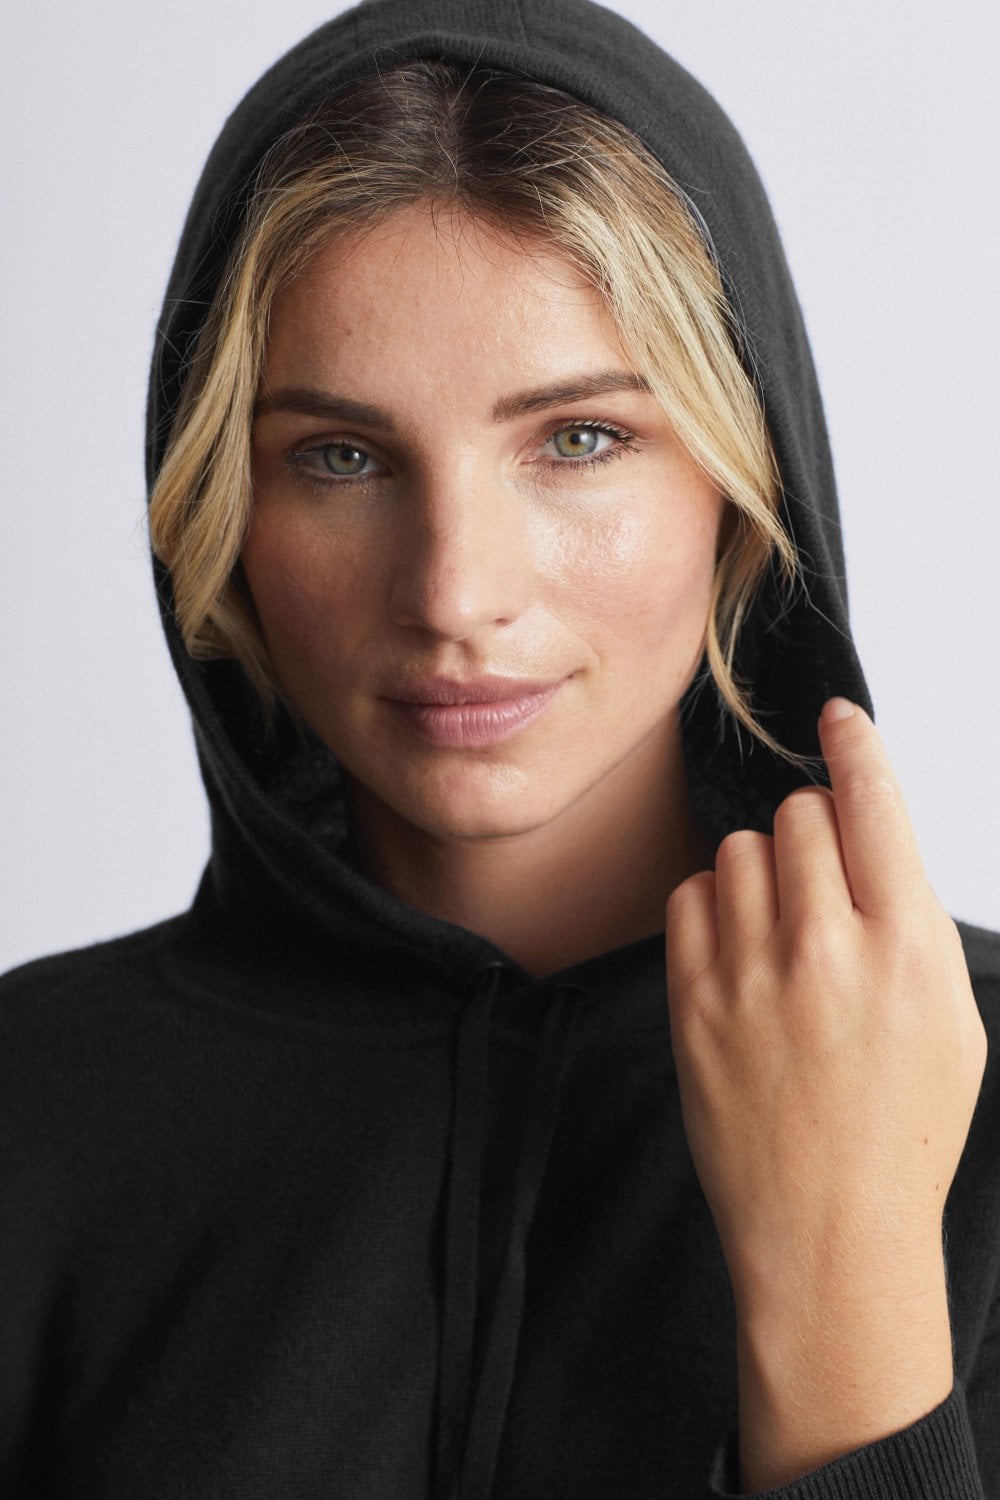 Cashmere Hoody in Black